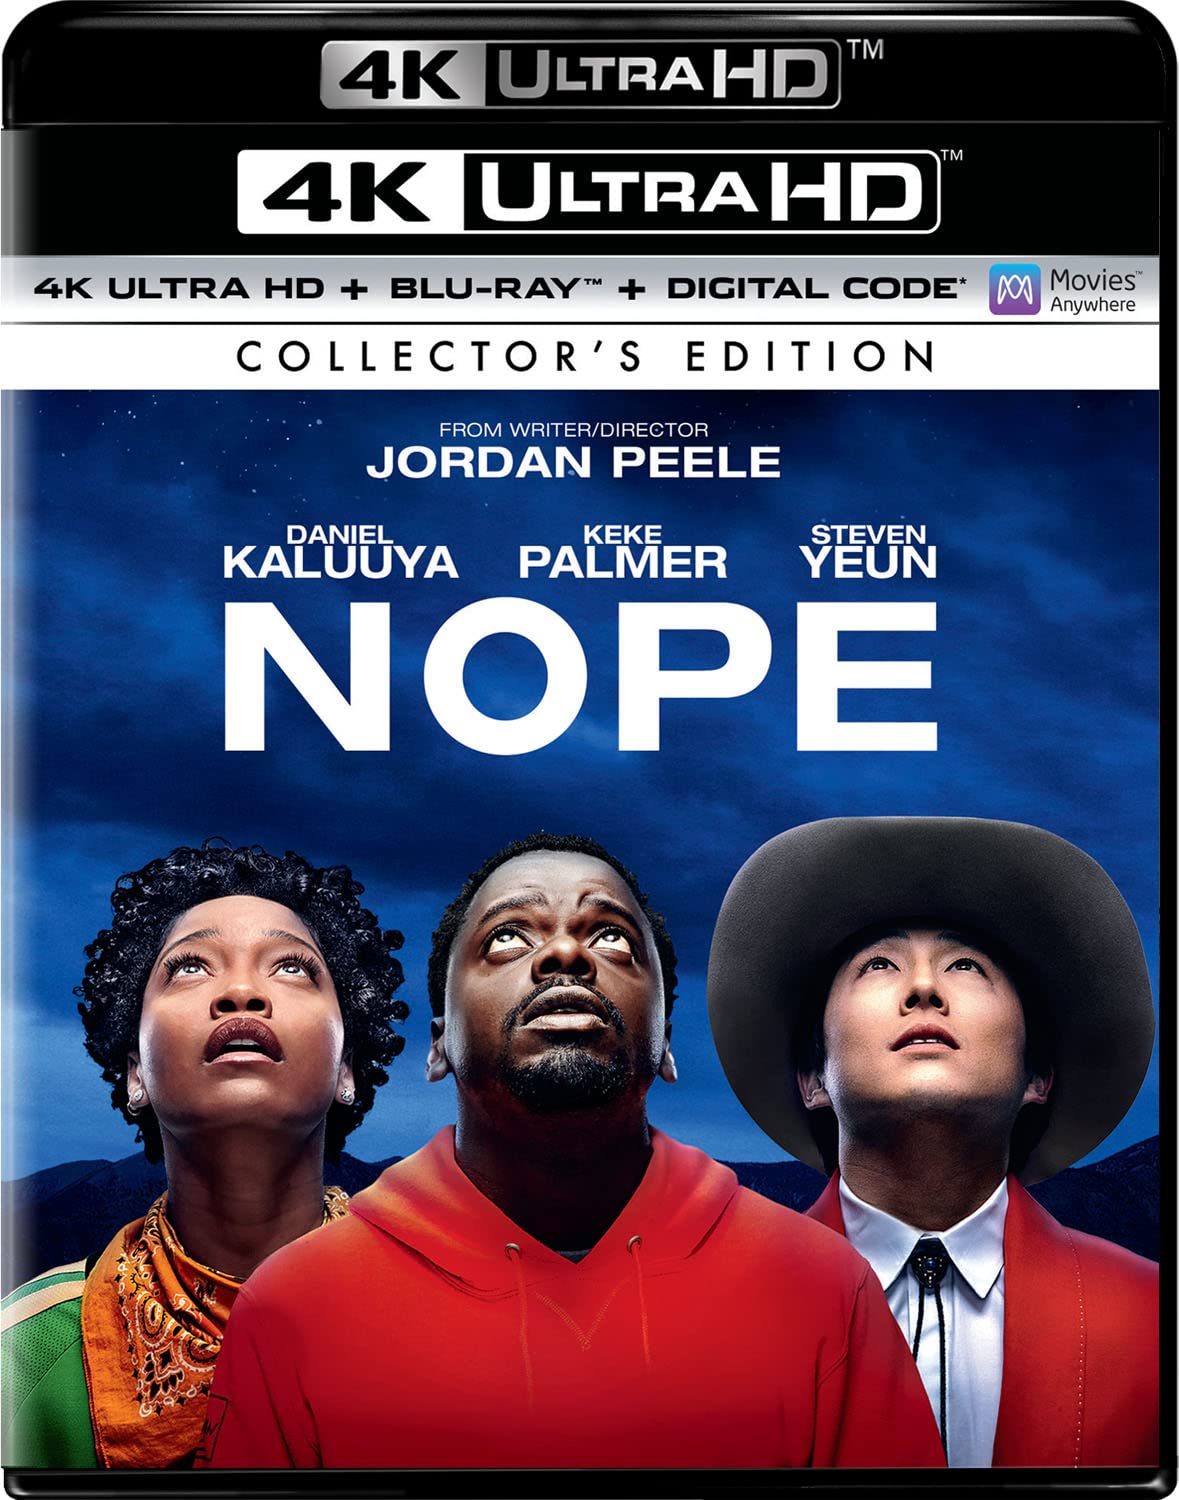 NOPE-4k-Blu-ray-front